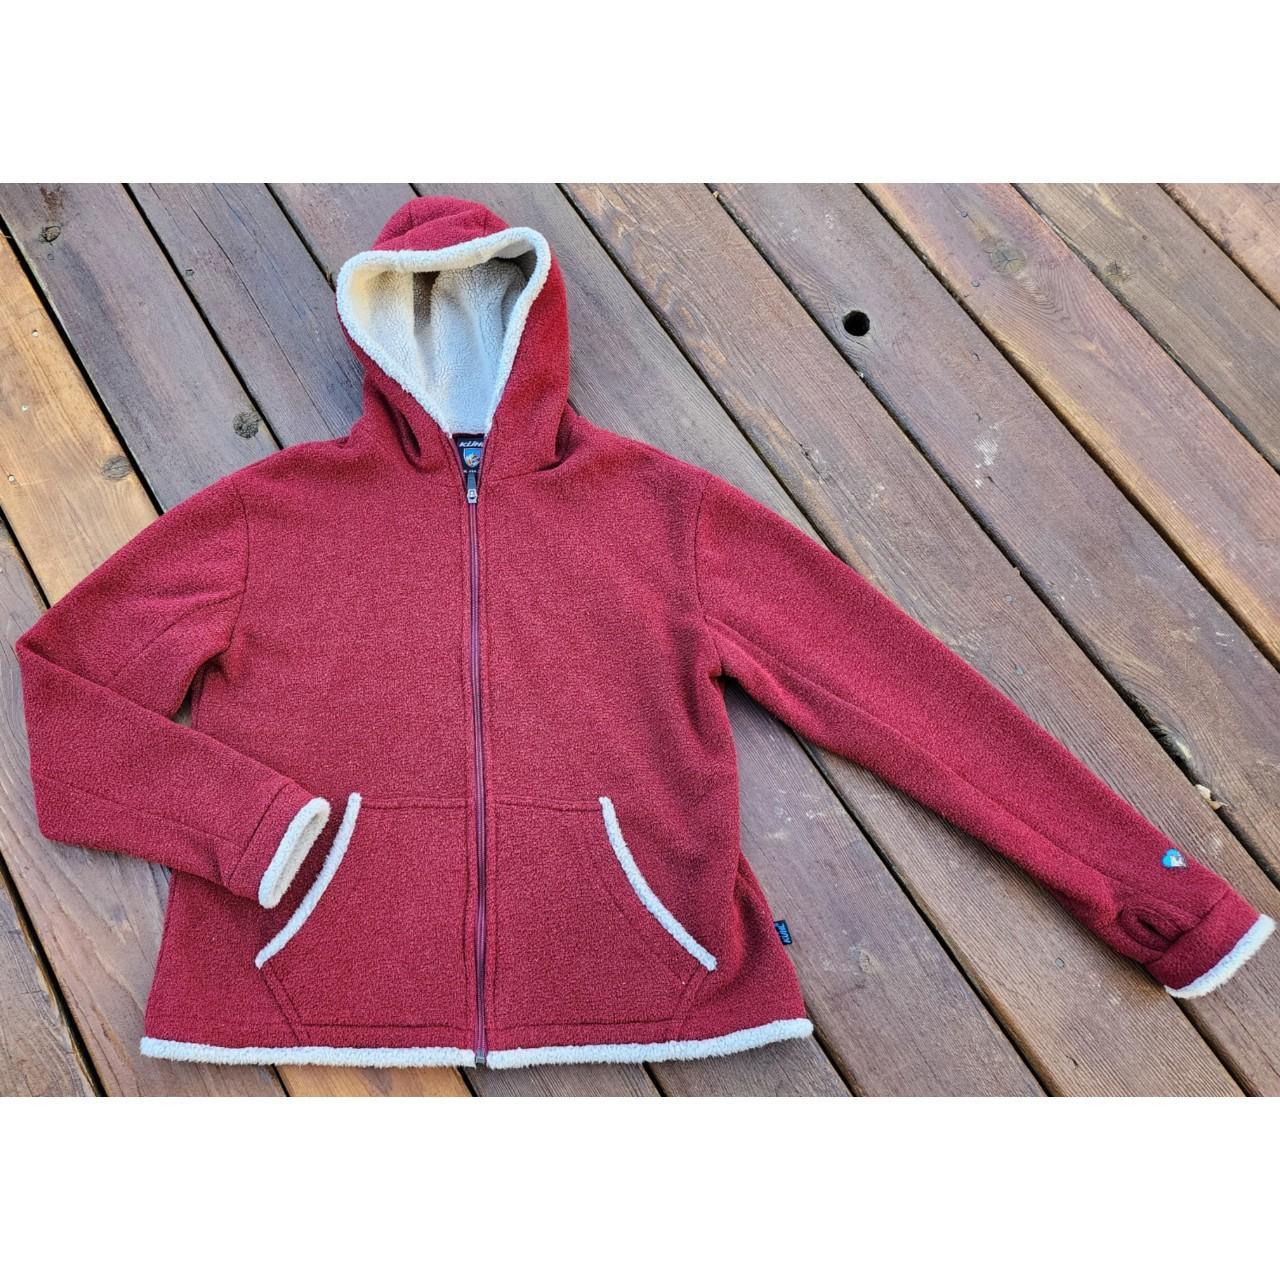 KÜHL Women's Red and Cream Jacket